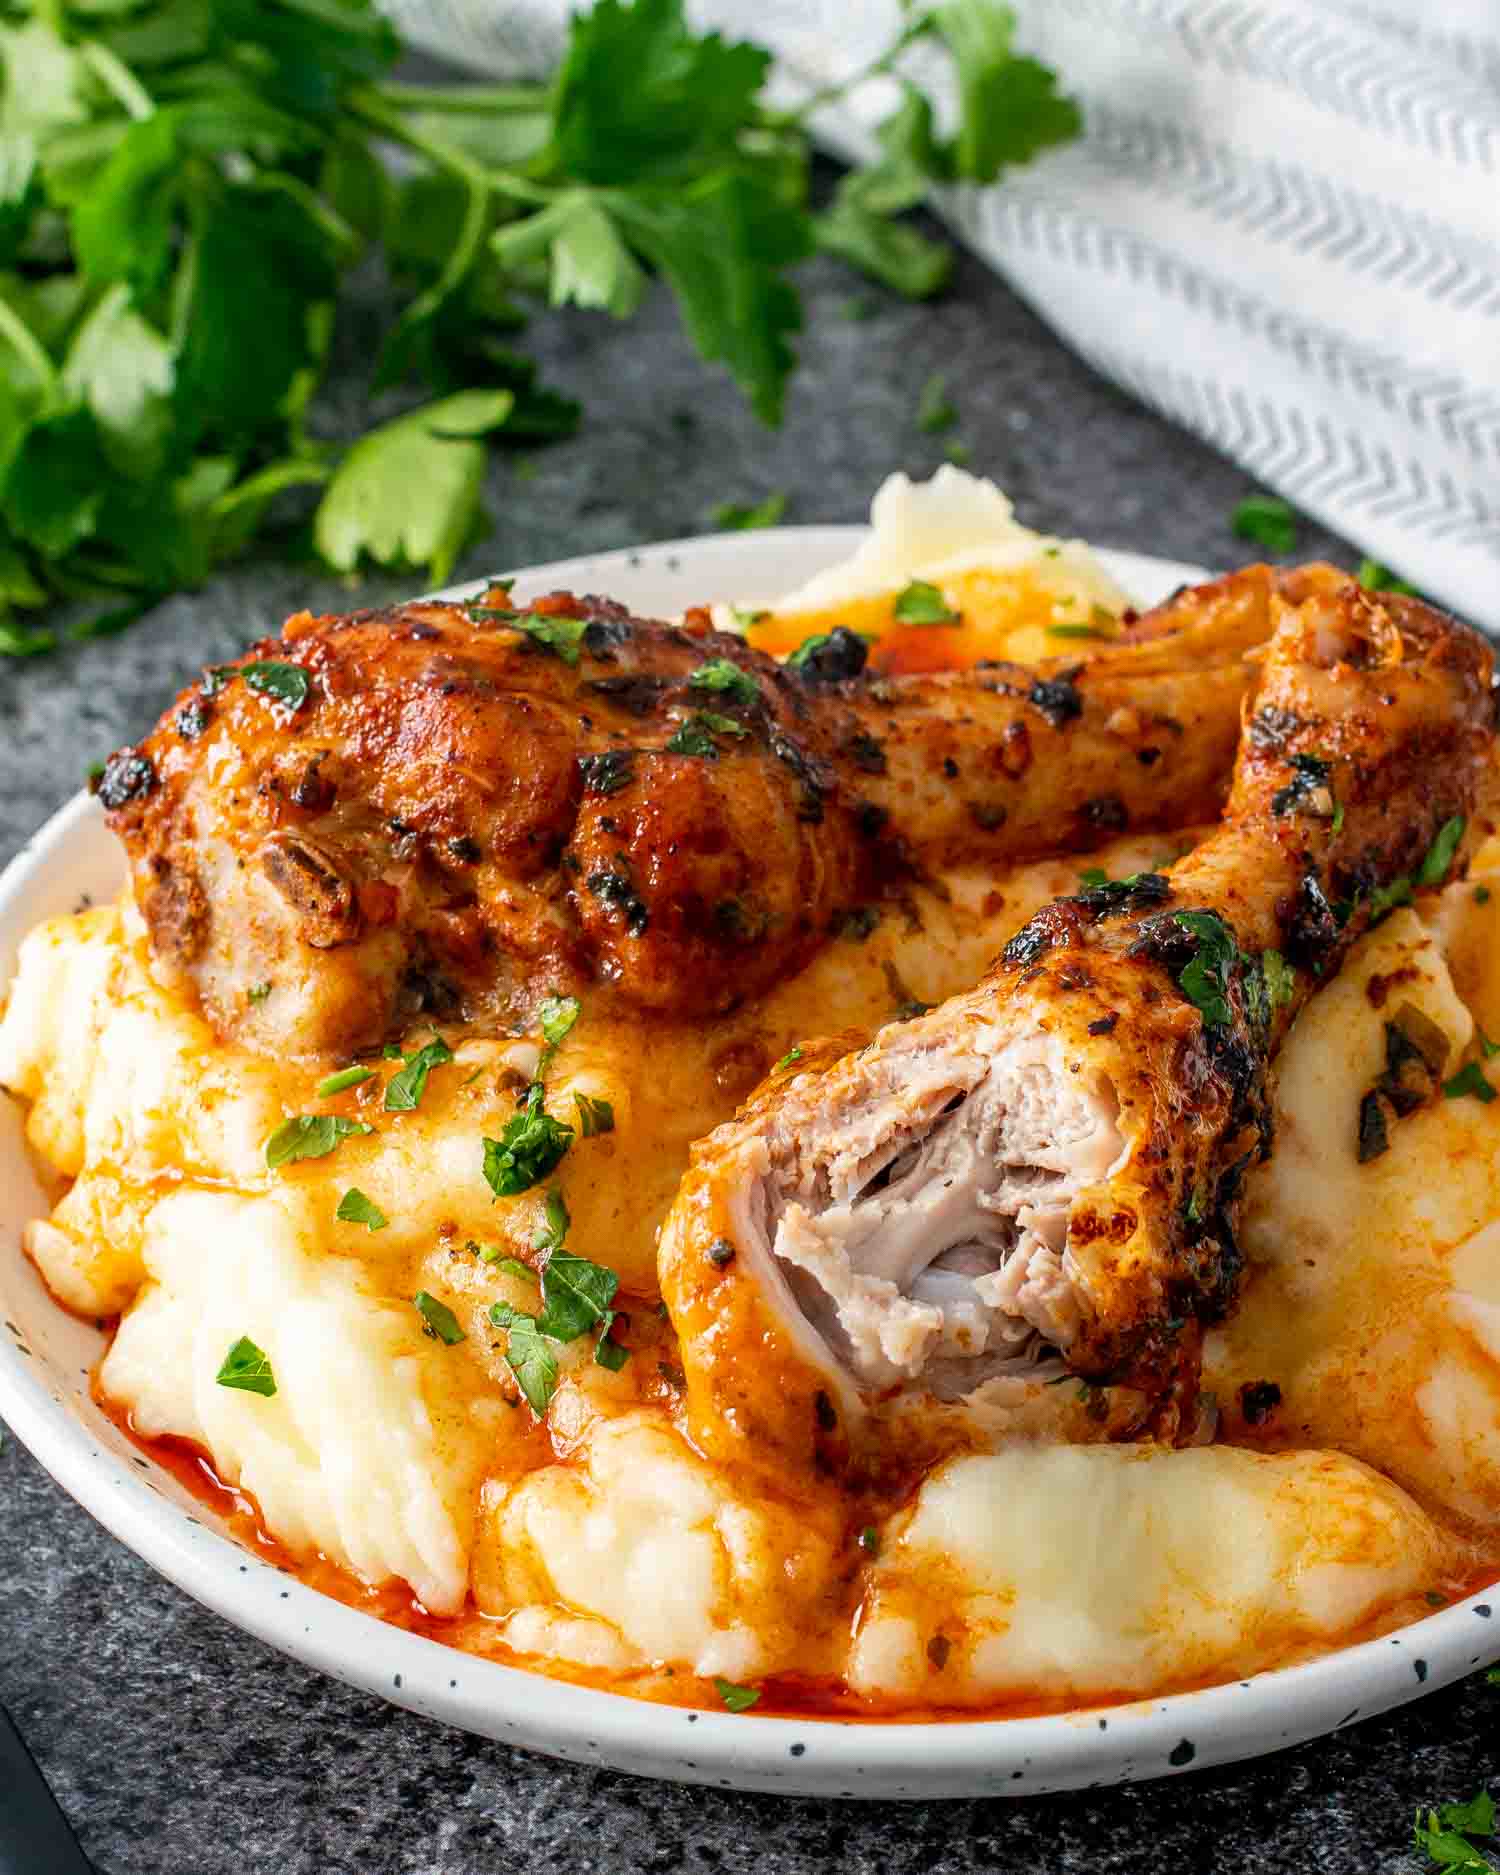 two garlic and paprika chicken drumsticks over a mashed potatoes garnished with parsley.